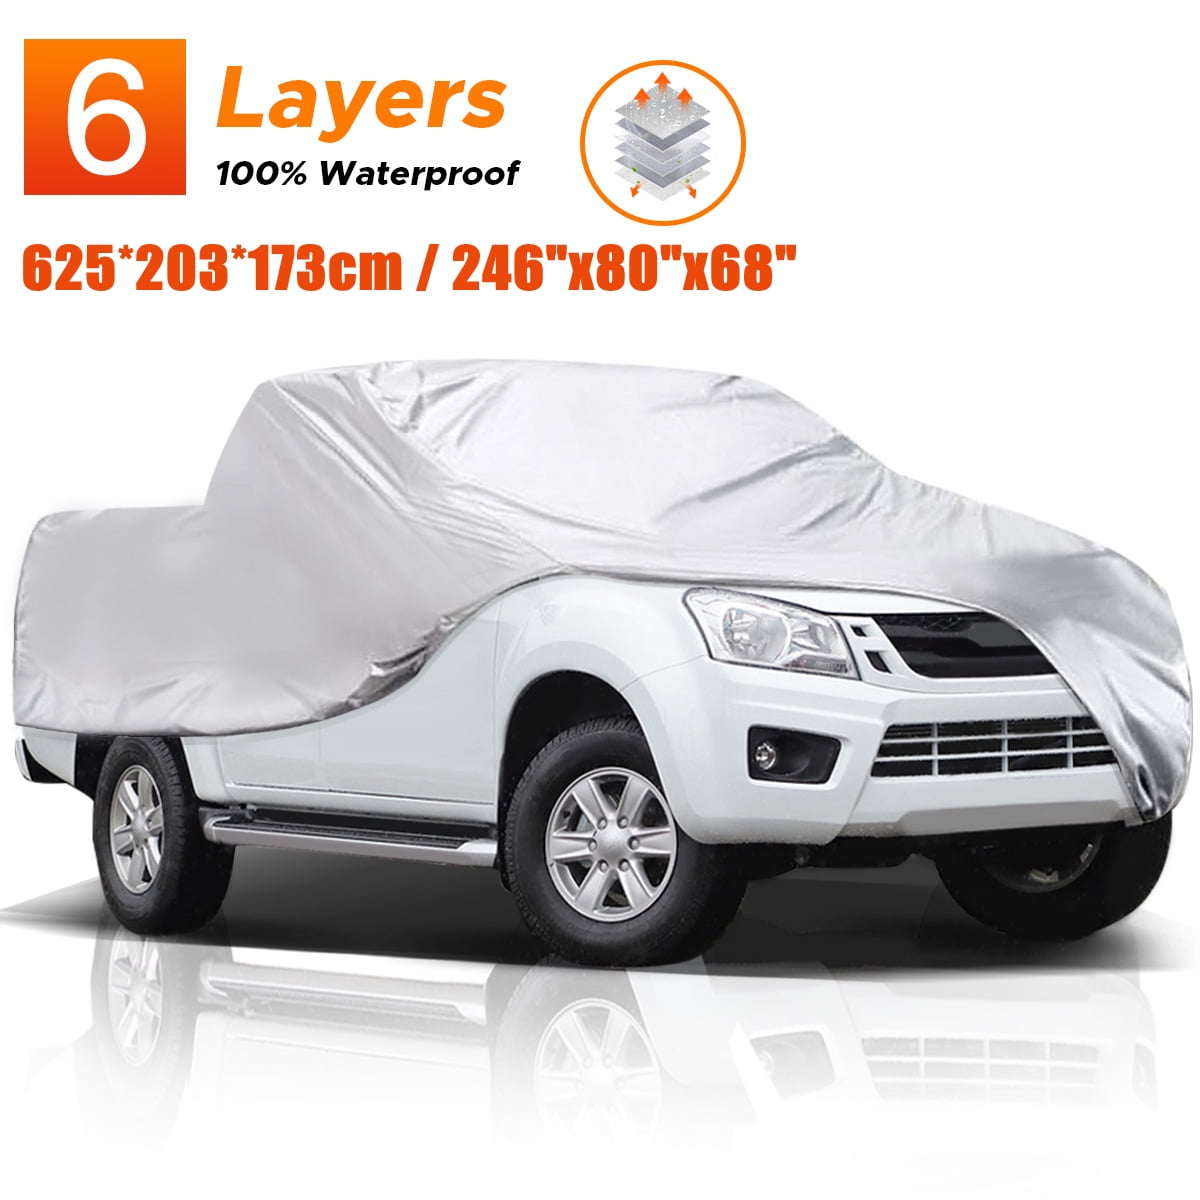 Lowest Price OxGord Auto Cover 1 Layer Dust Cover Fits up to 206 Inches and Truck Van Ready-Fit Semi Glove Fit fro SUV 